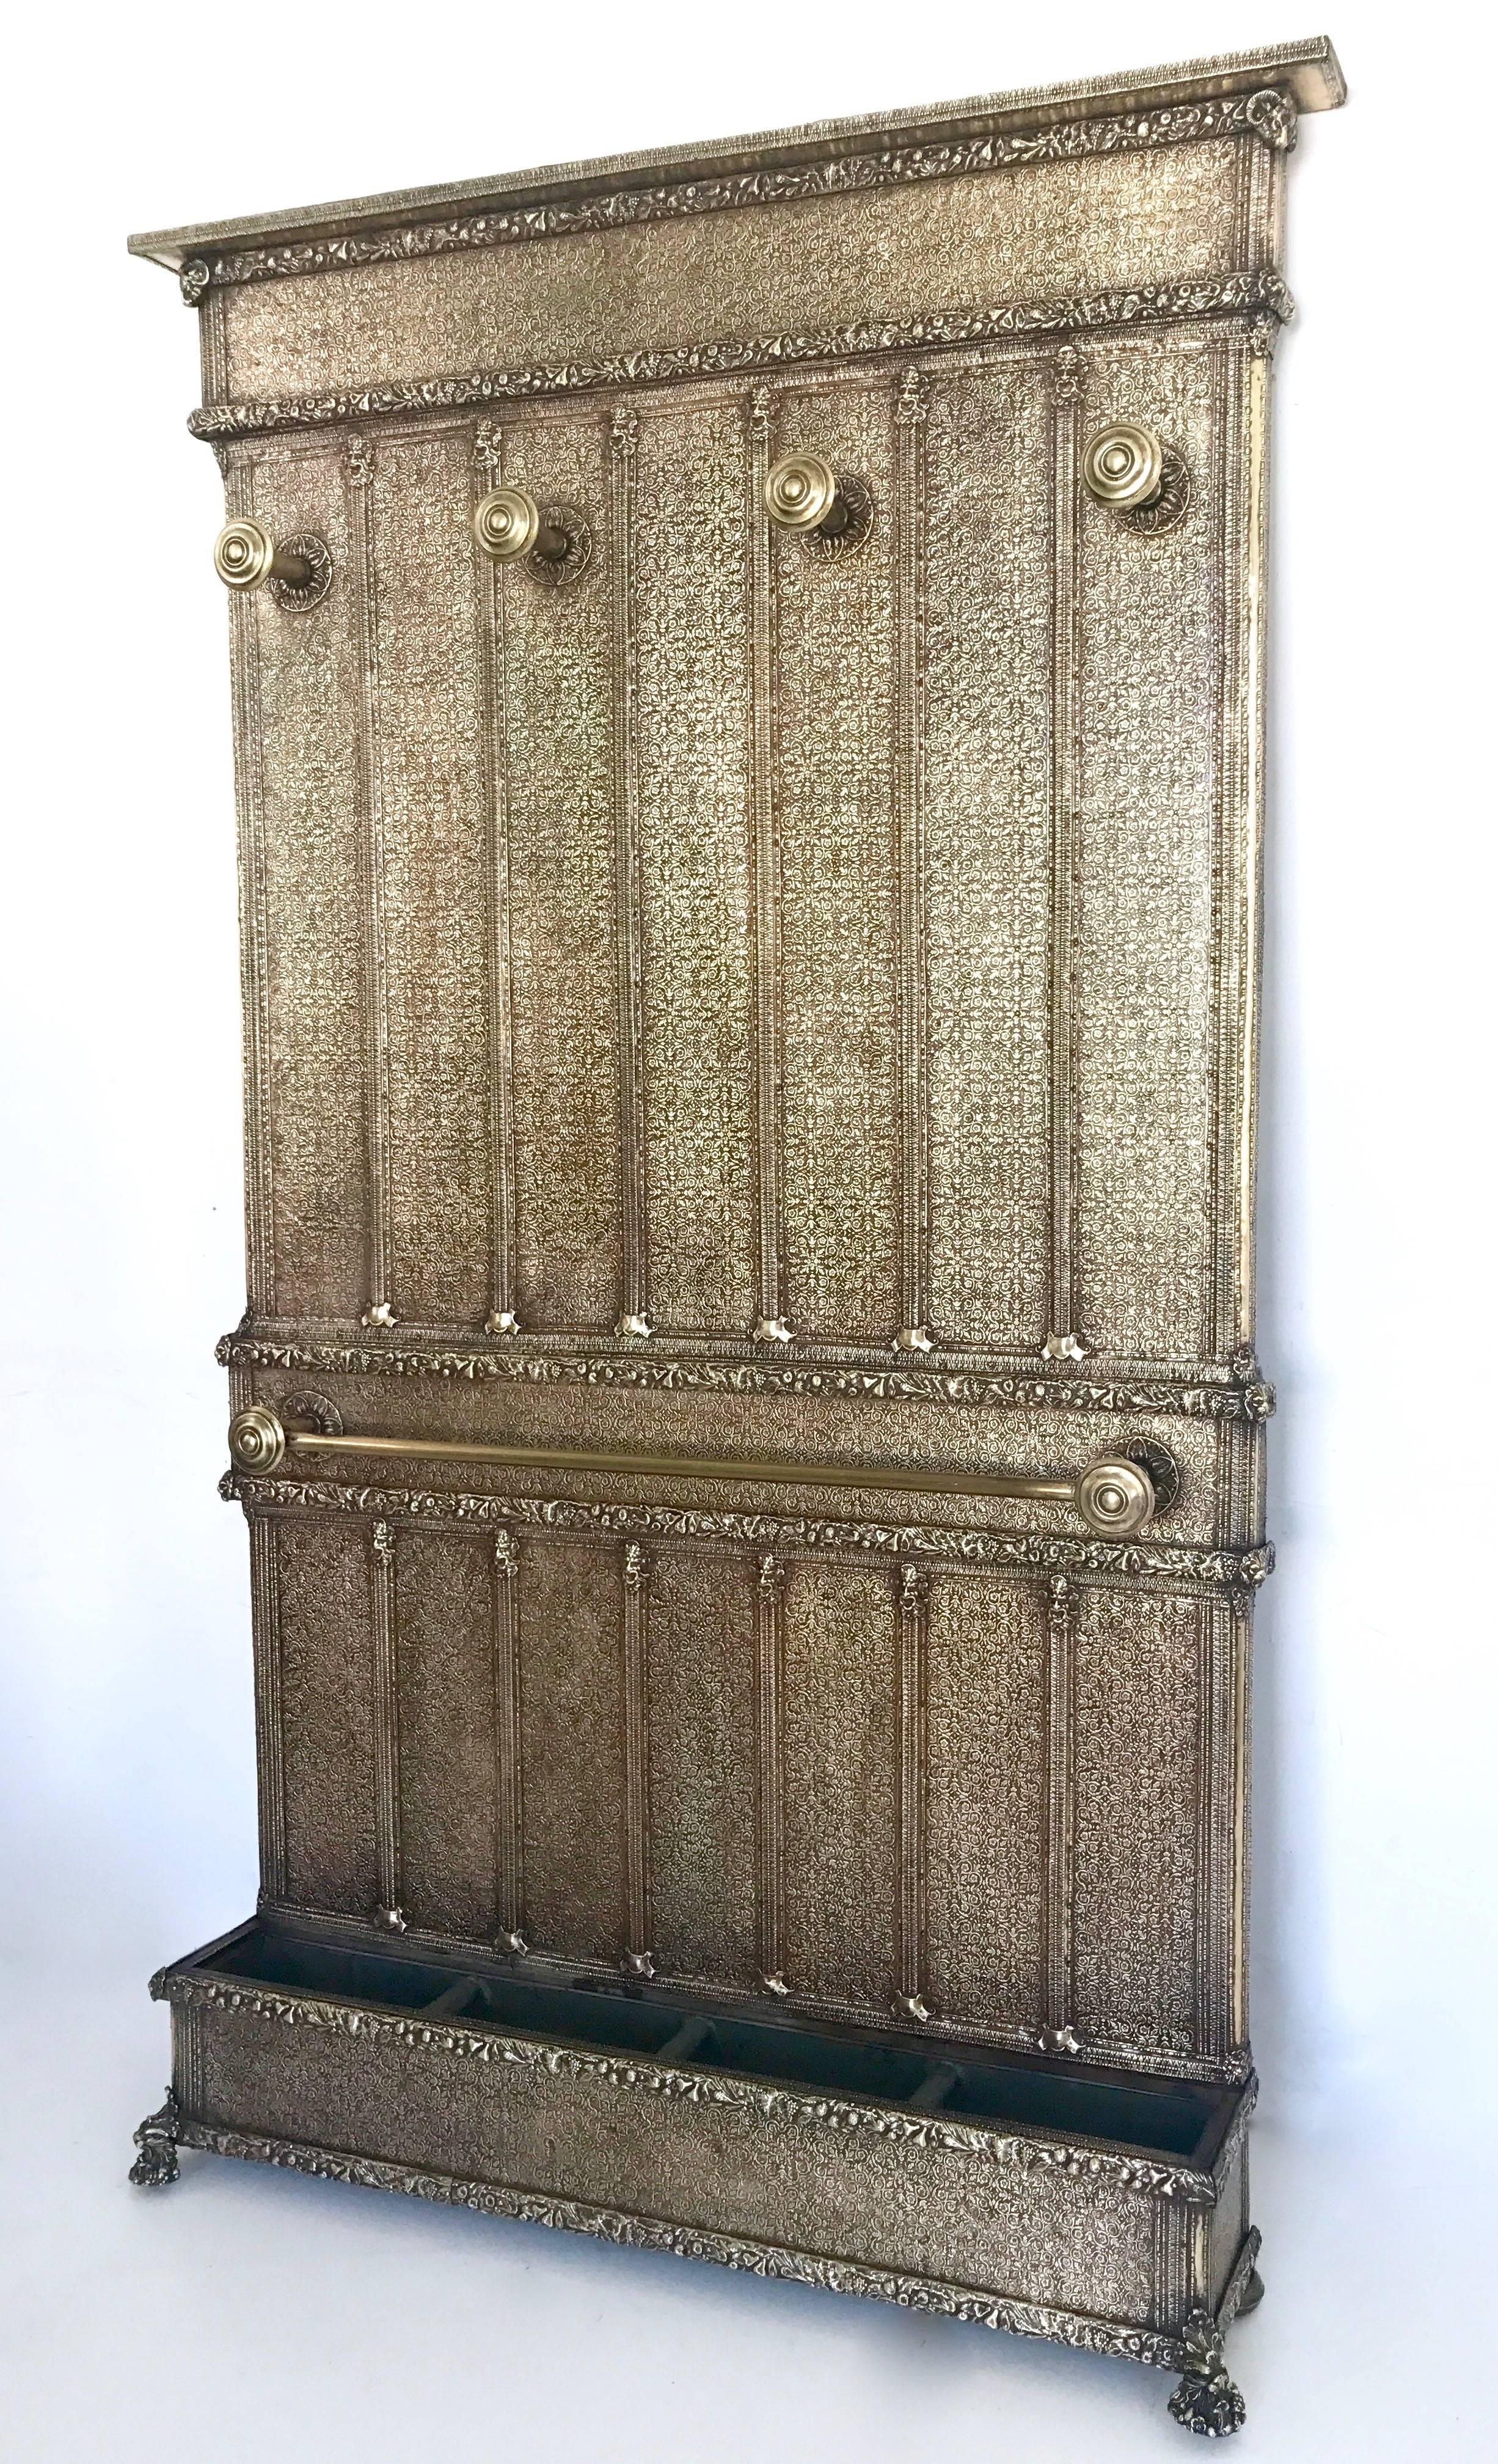 This is a stunning Italian coat rack.
It is entirely covered in sculpted brass and bronze cast parts.
In perfect original condition.